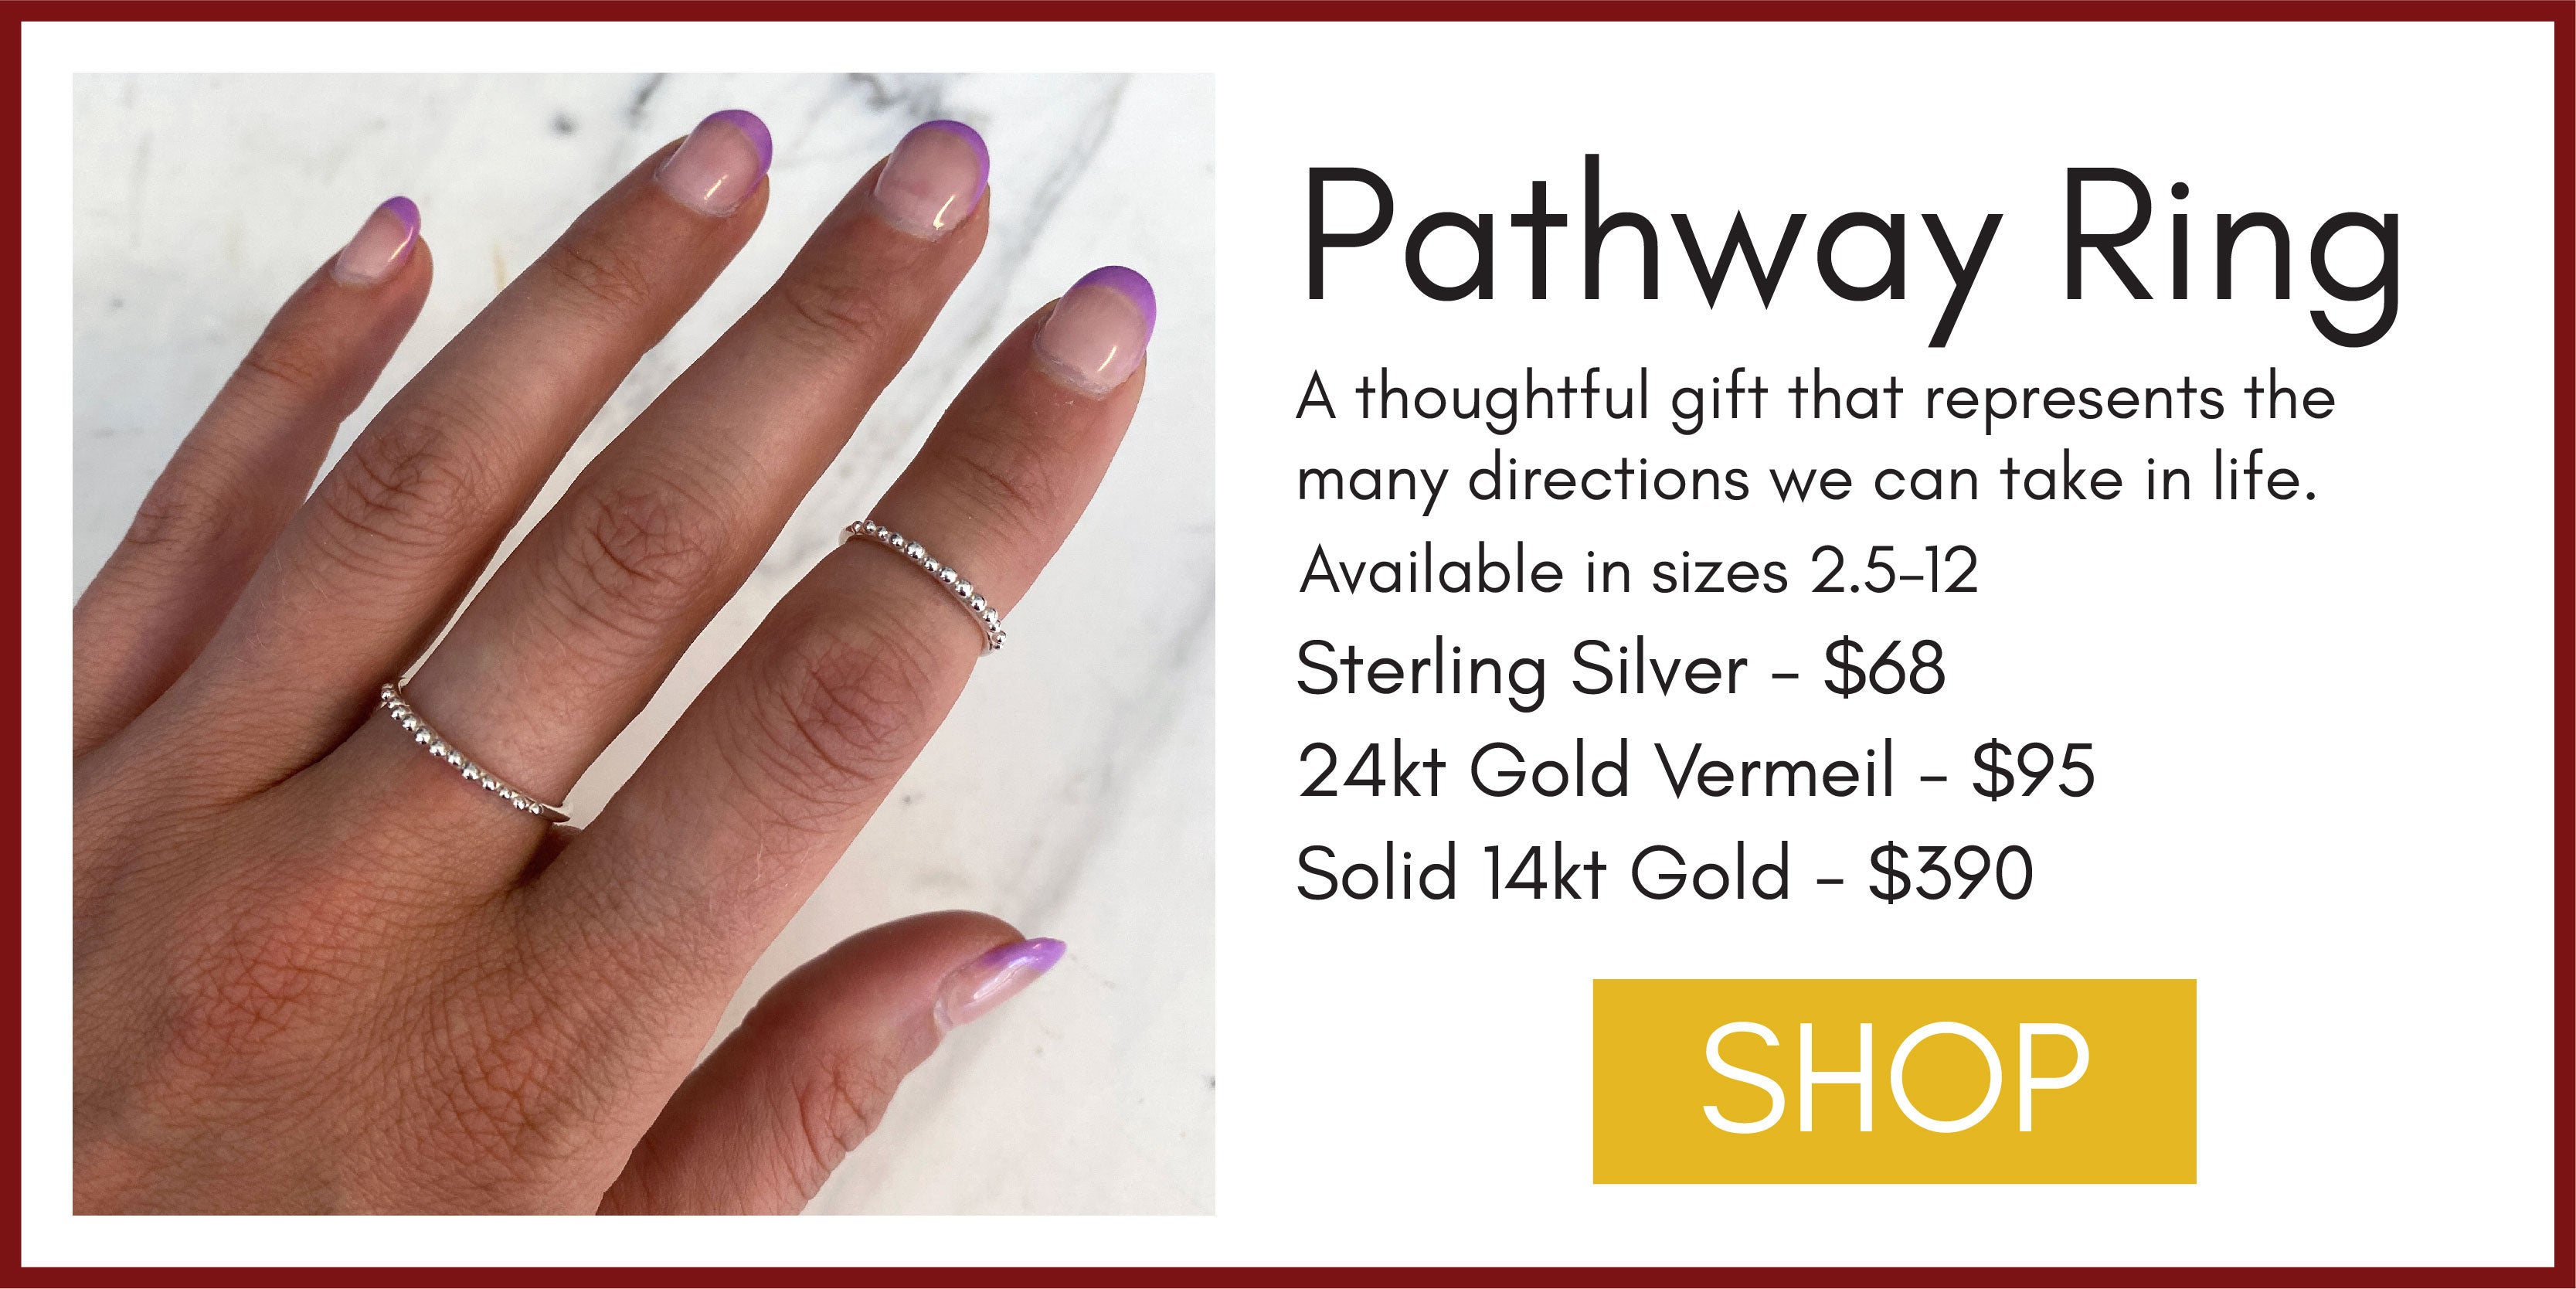 Graphic with title "Pathway Ring" and an image that shows the Pathway Ring on someone's finger